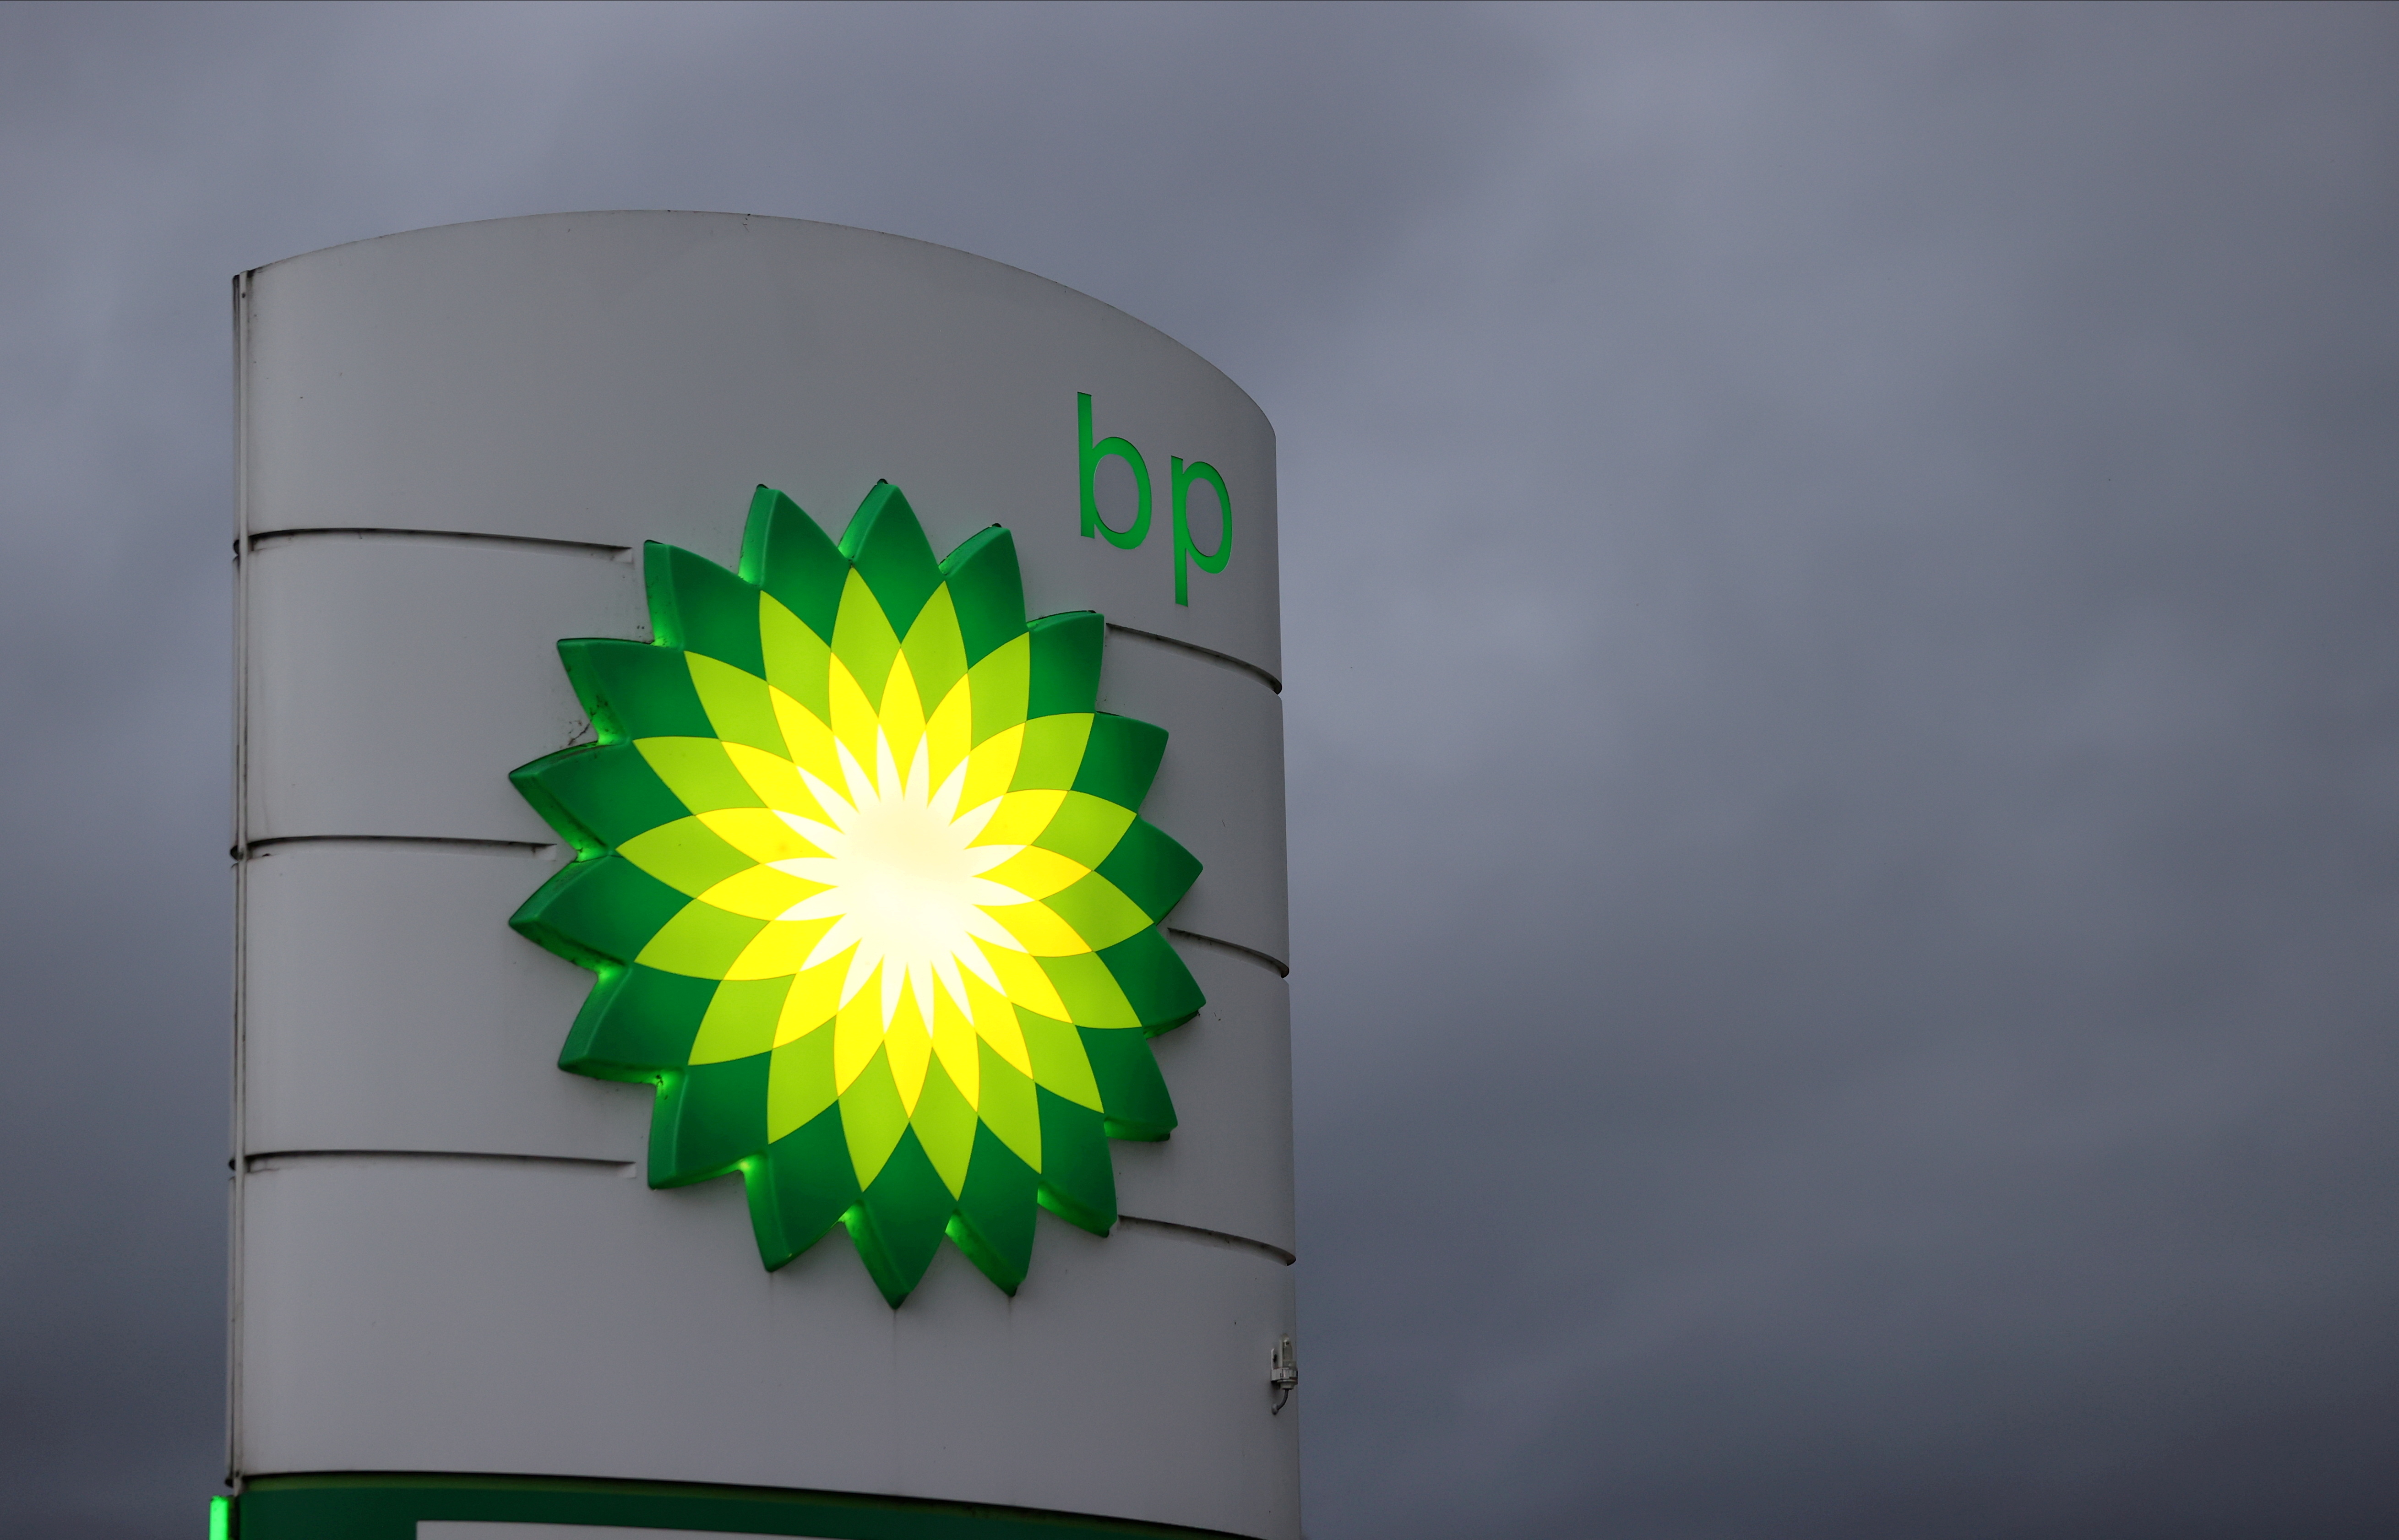 An illuminated BP logo is seen at a petrol station in Gateshead, Britain September 23, 2021. REUTERS/Lee Smith